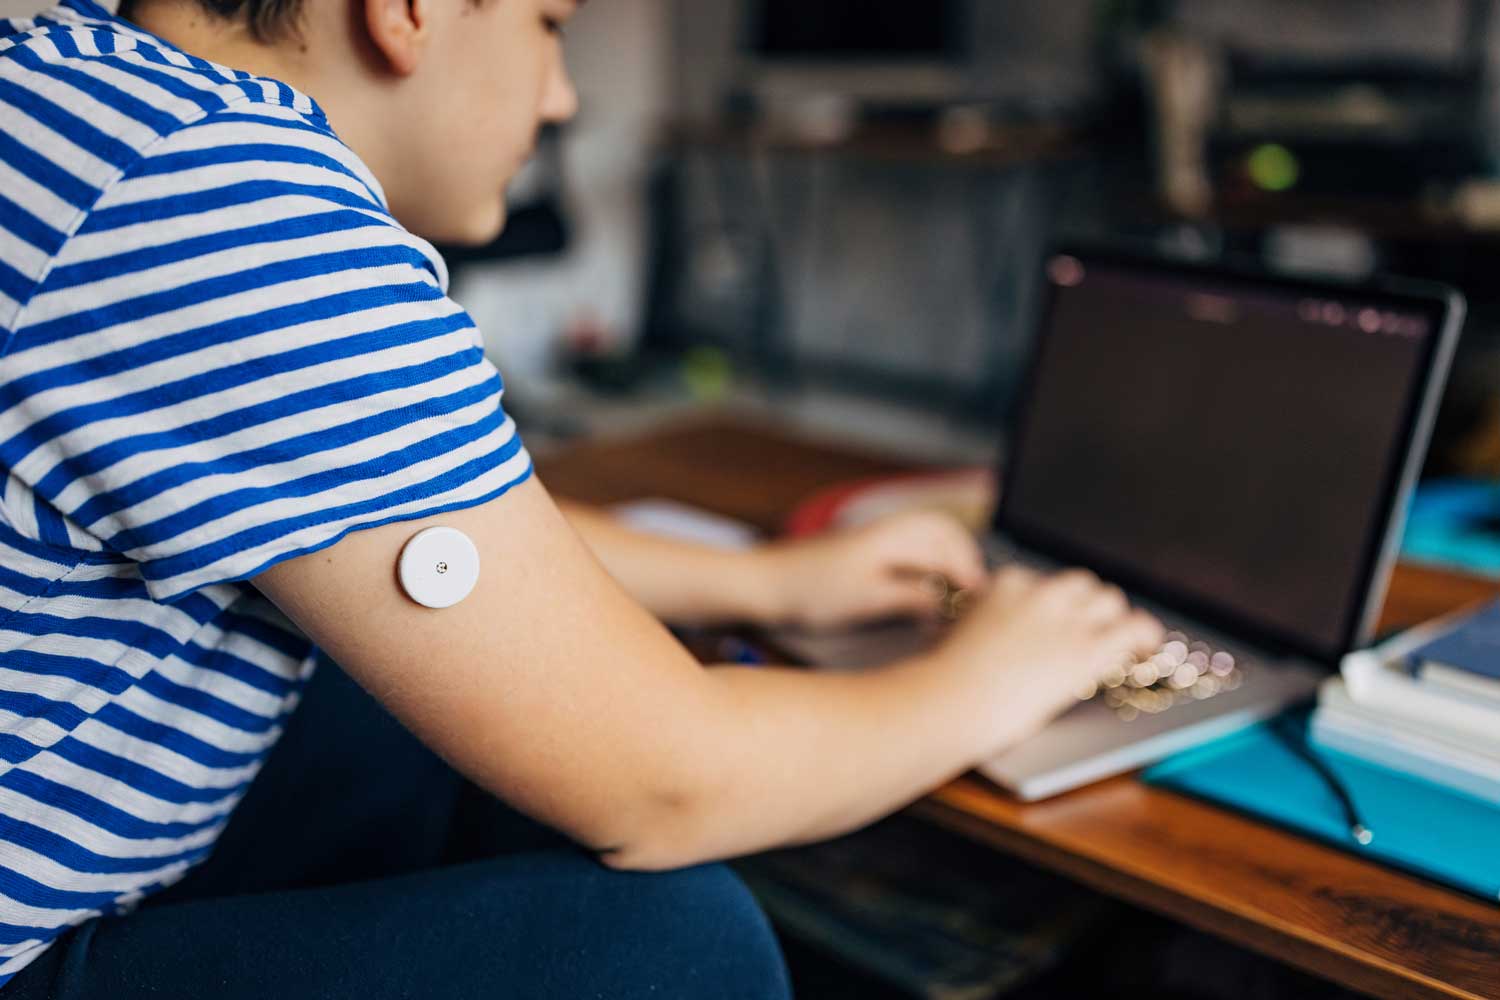 A boy wearing a diabetic patch on his arm uses a laptop.